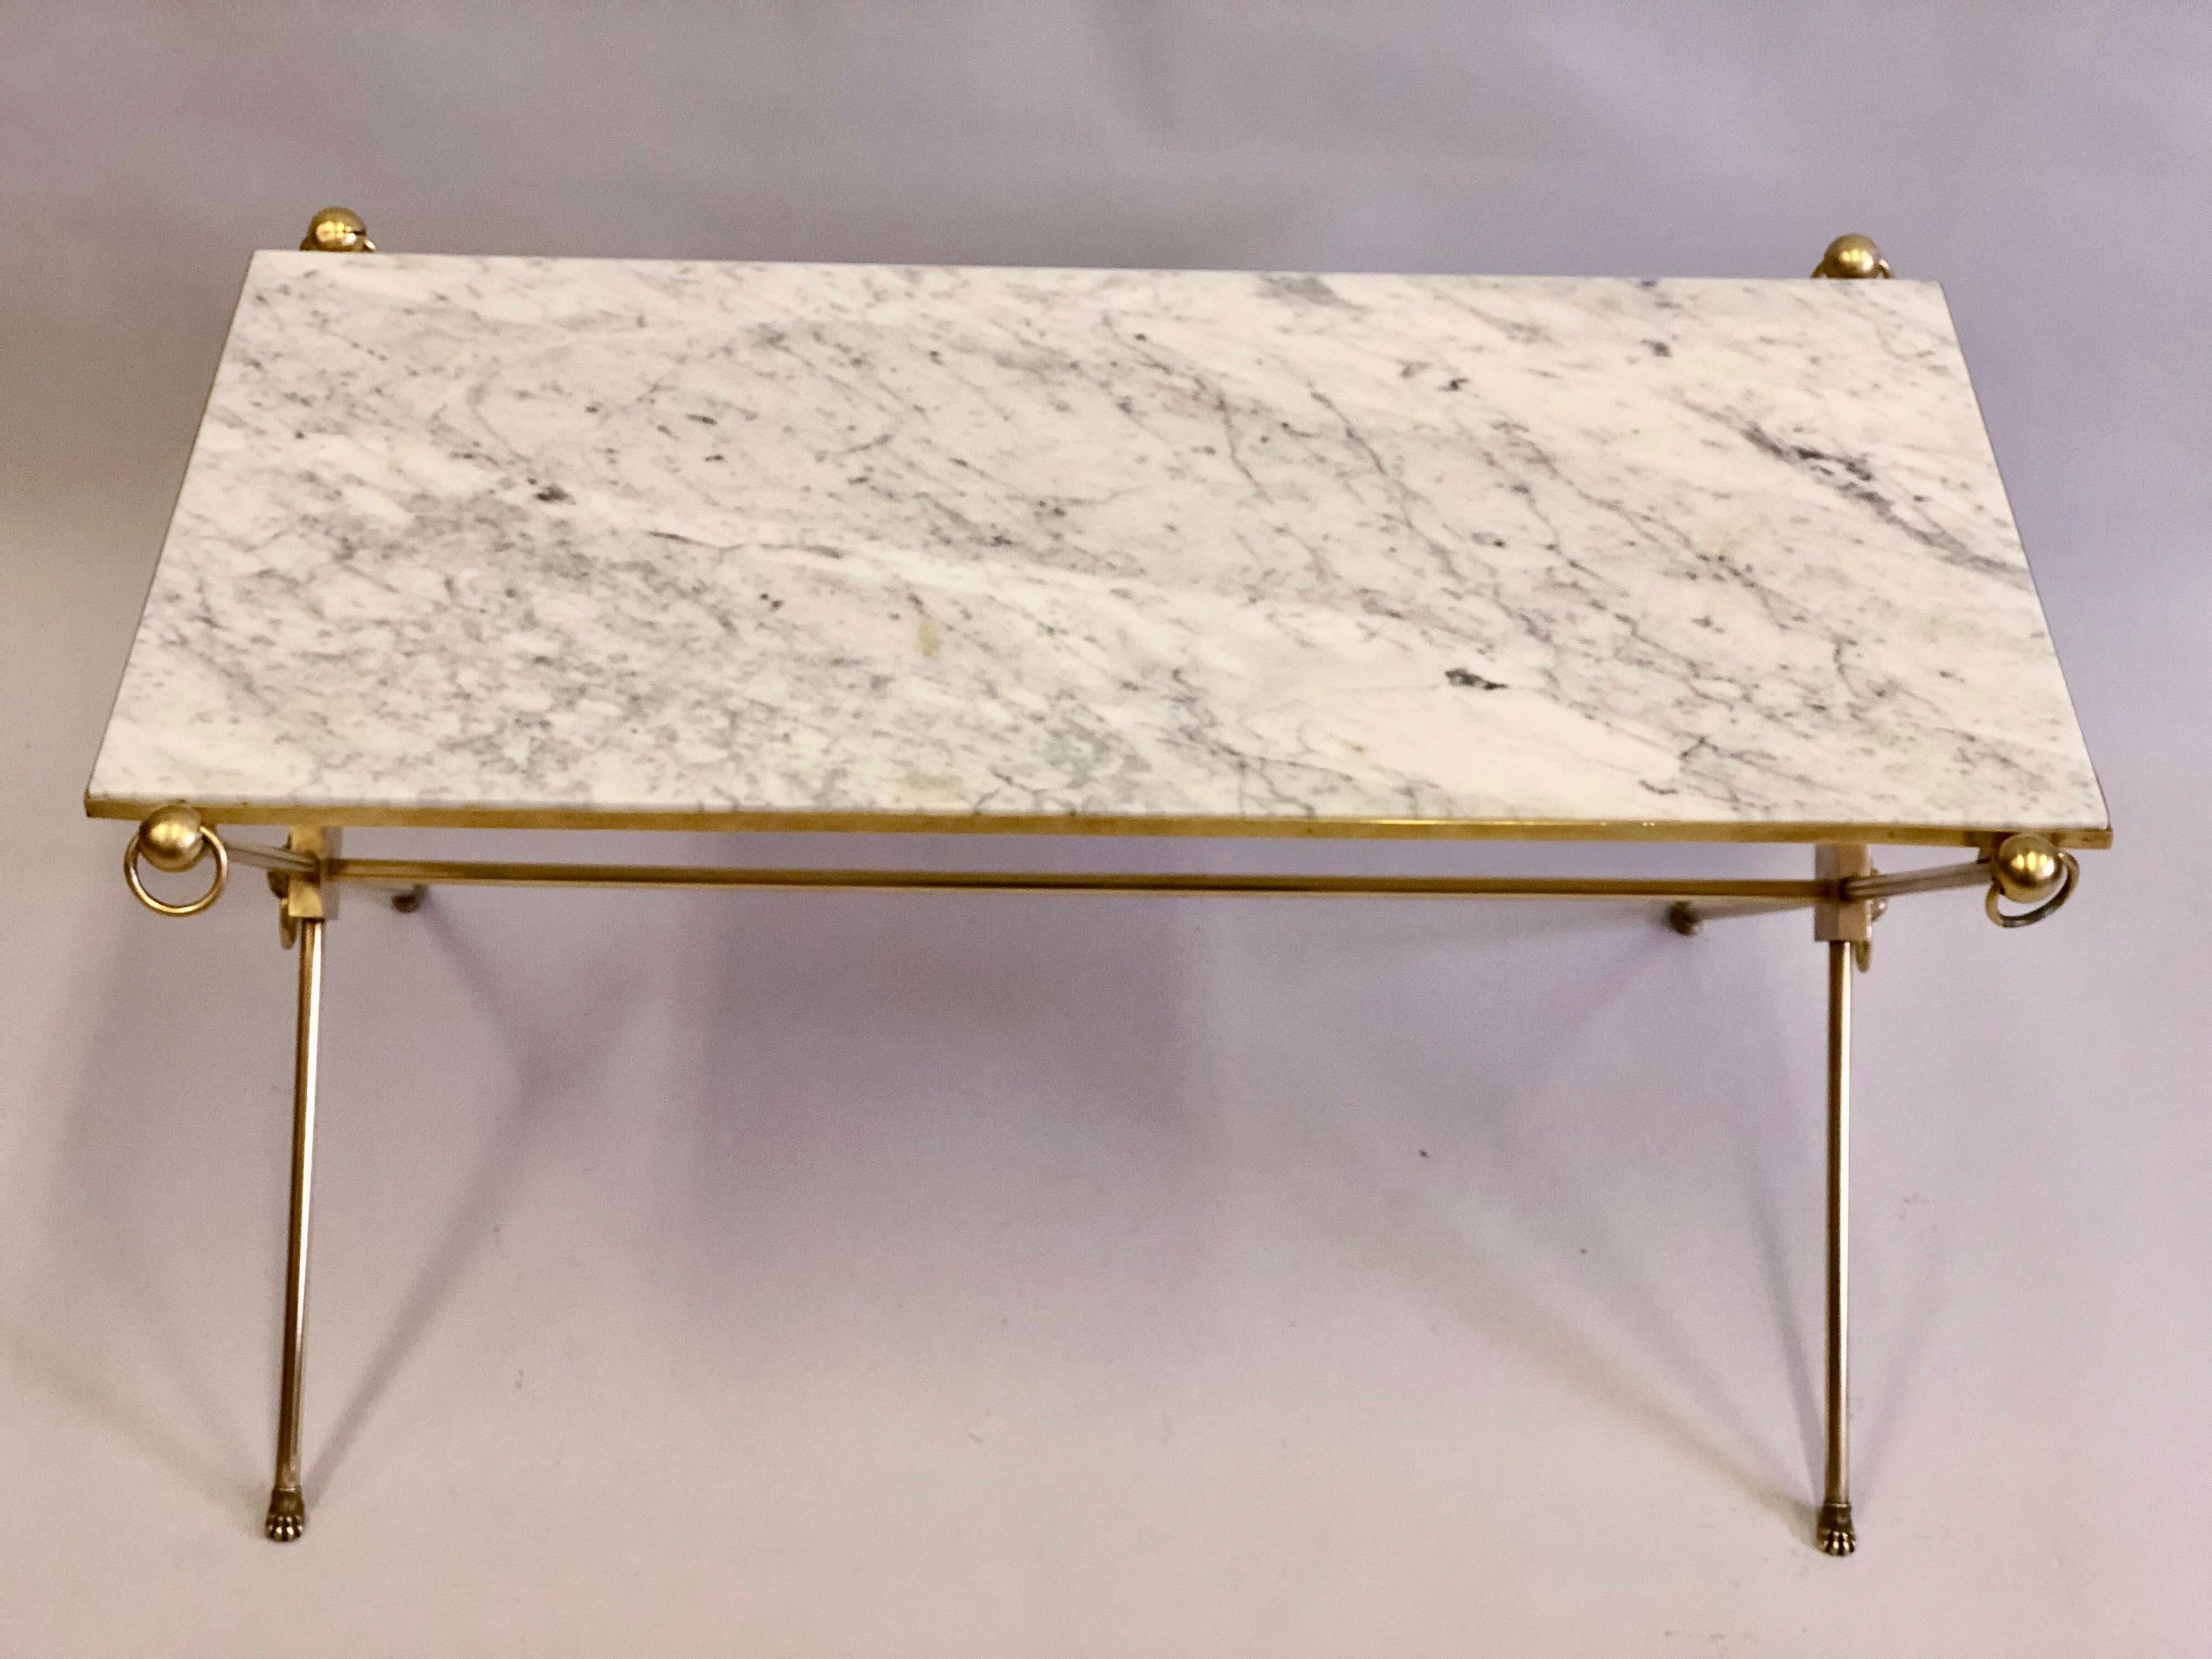 Hand-Crafted French Modern Neoclassical Brass and Marble Coffee Table by Maison Jansen